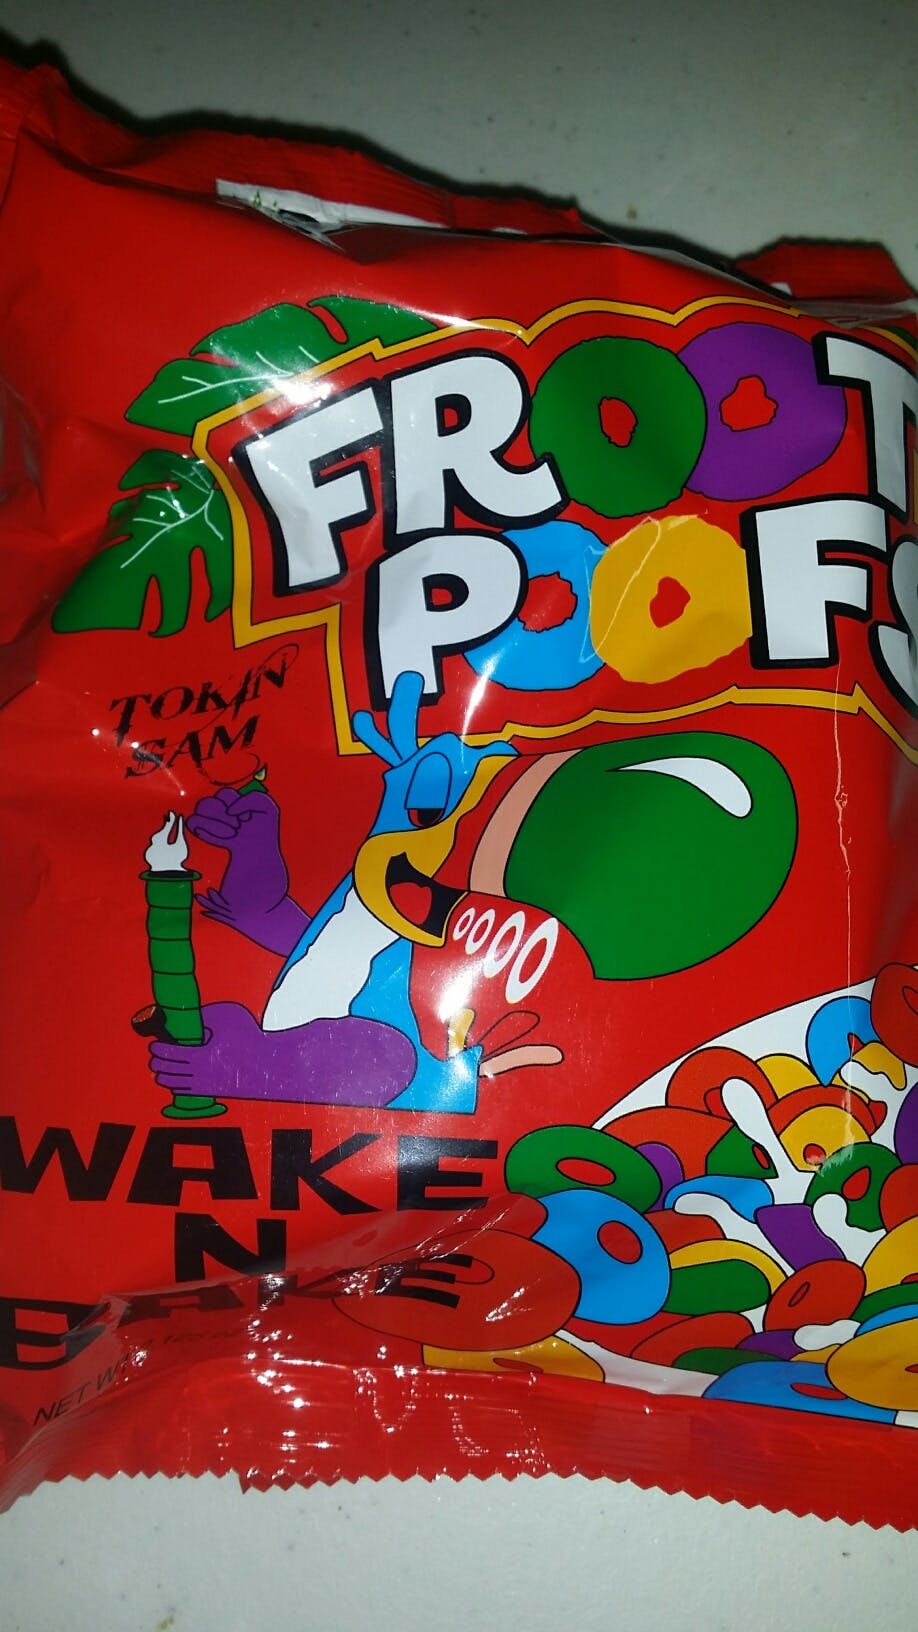 edible-froot-poofs-150-mg-thc